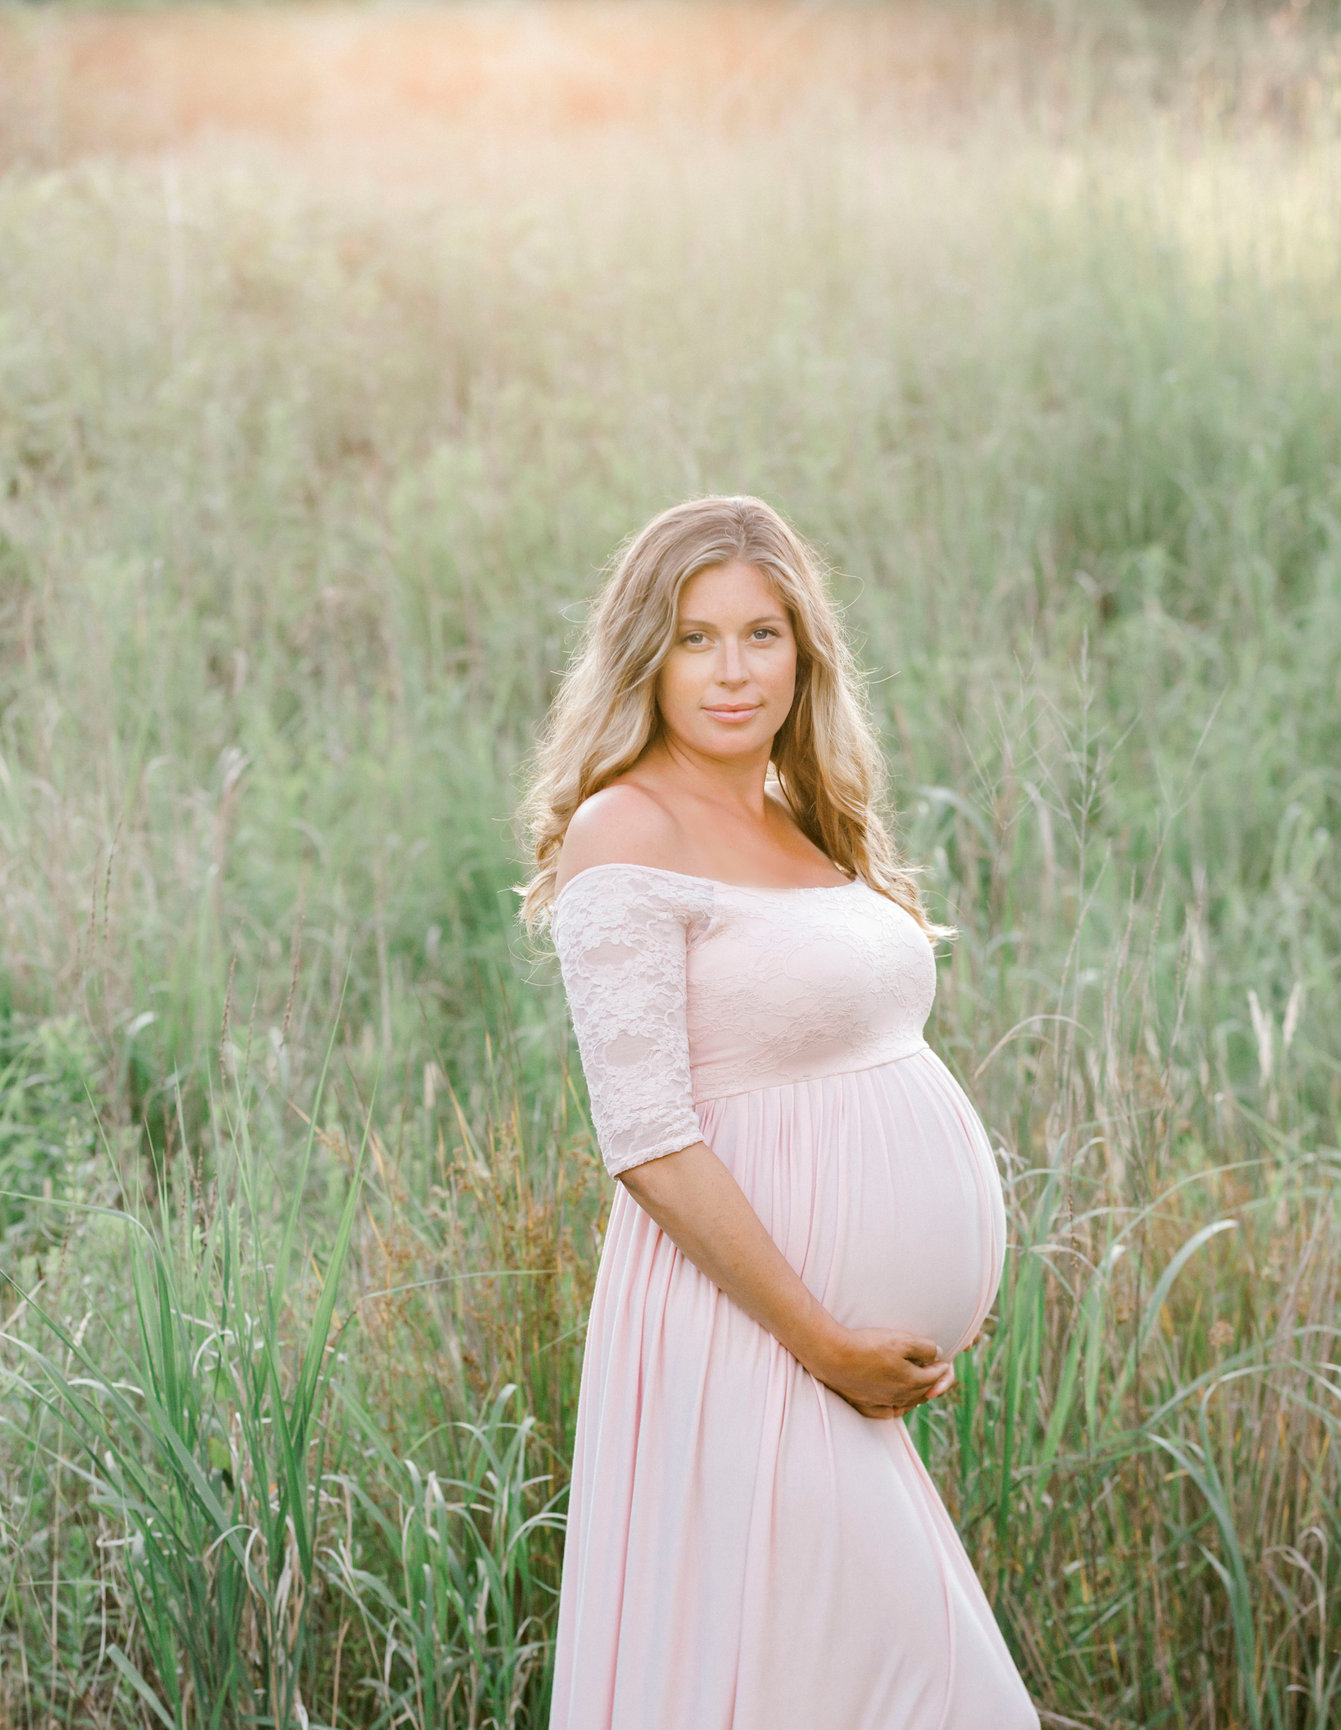 Maternity Portrait Gallery | Catie McDade Photography | Cape Cod, MA